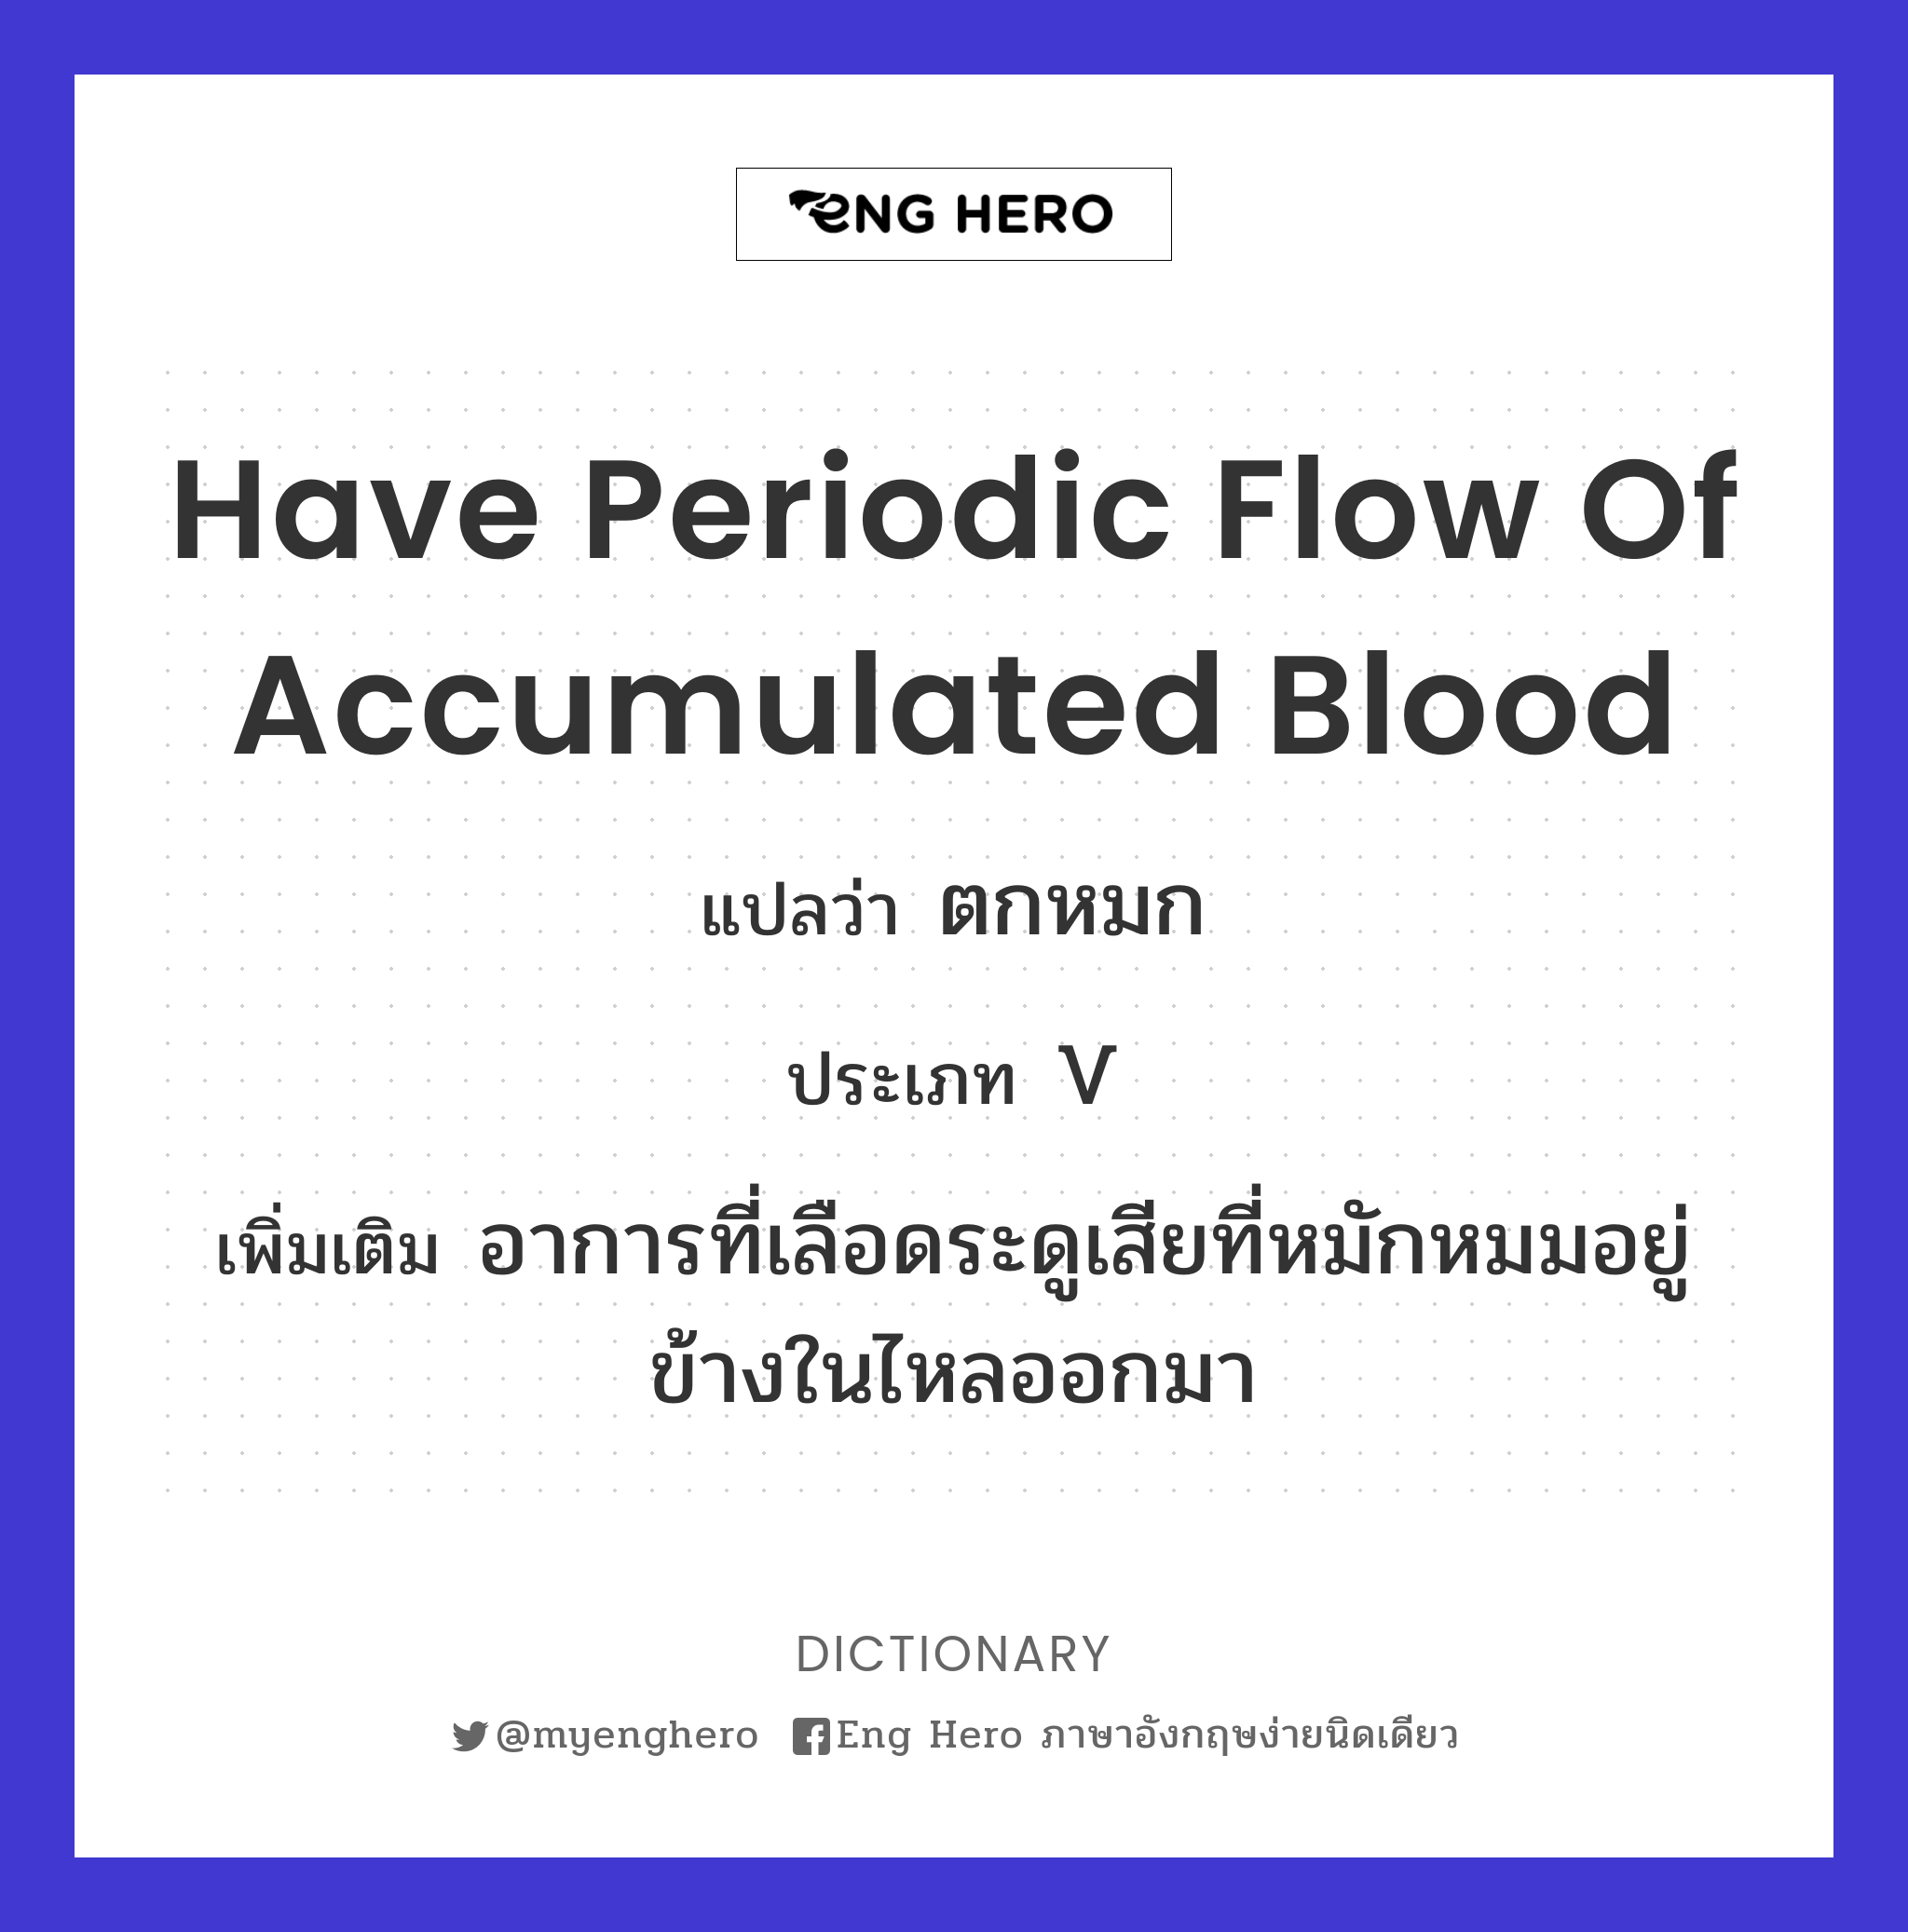 have periodic flow of accumulated blood